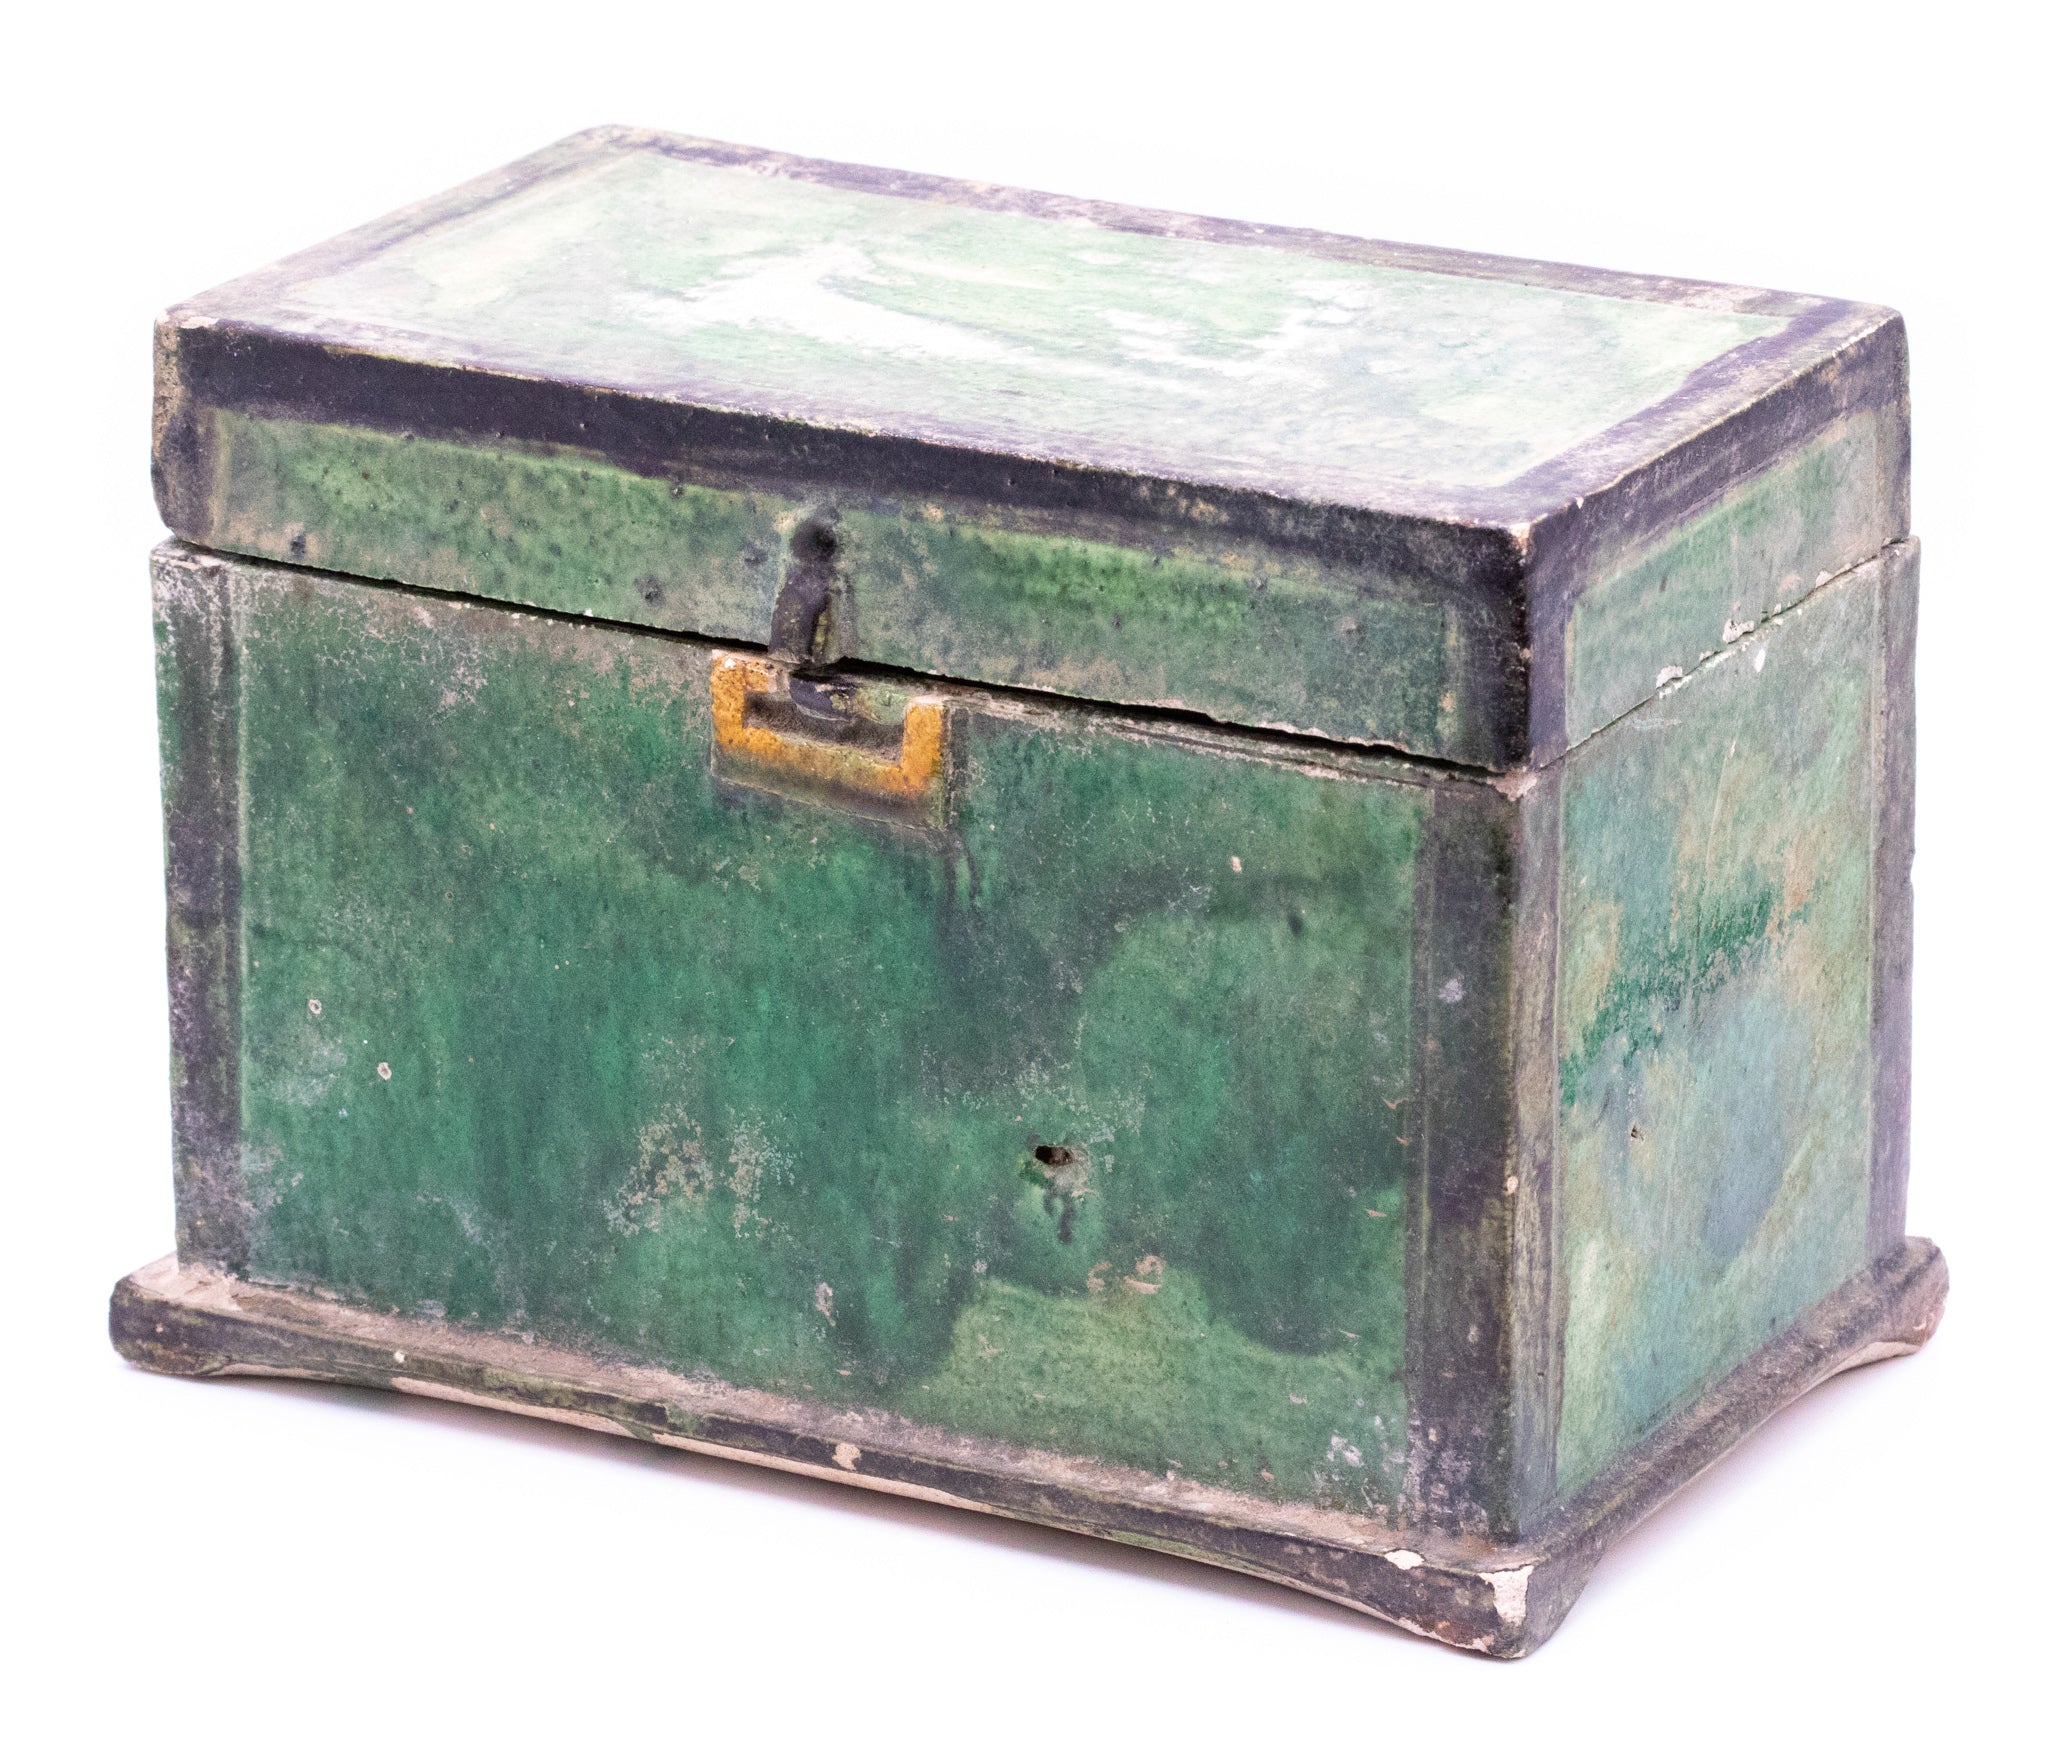 CHINA MING DYNASTY 1368-1644 AD GREEN GLAZED EARTHENWARE CHEST